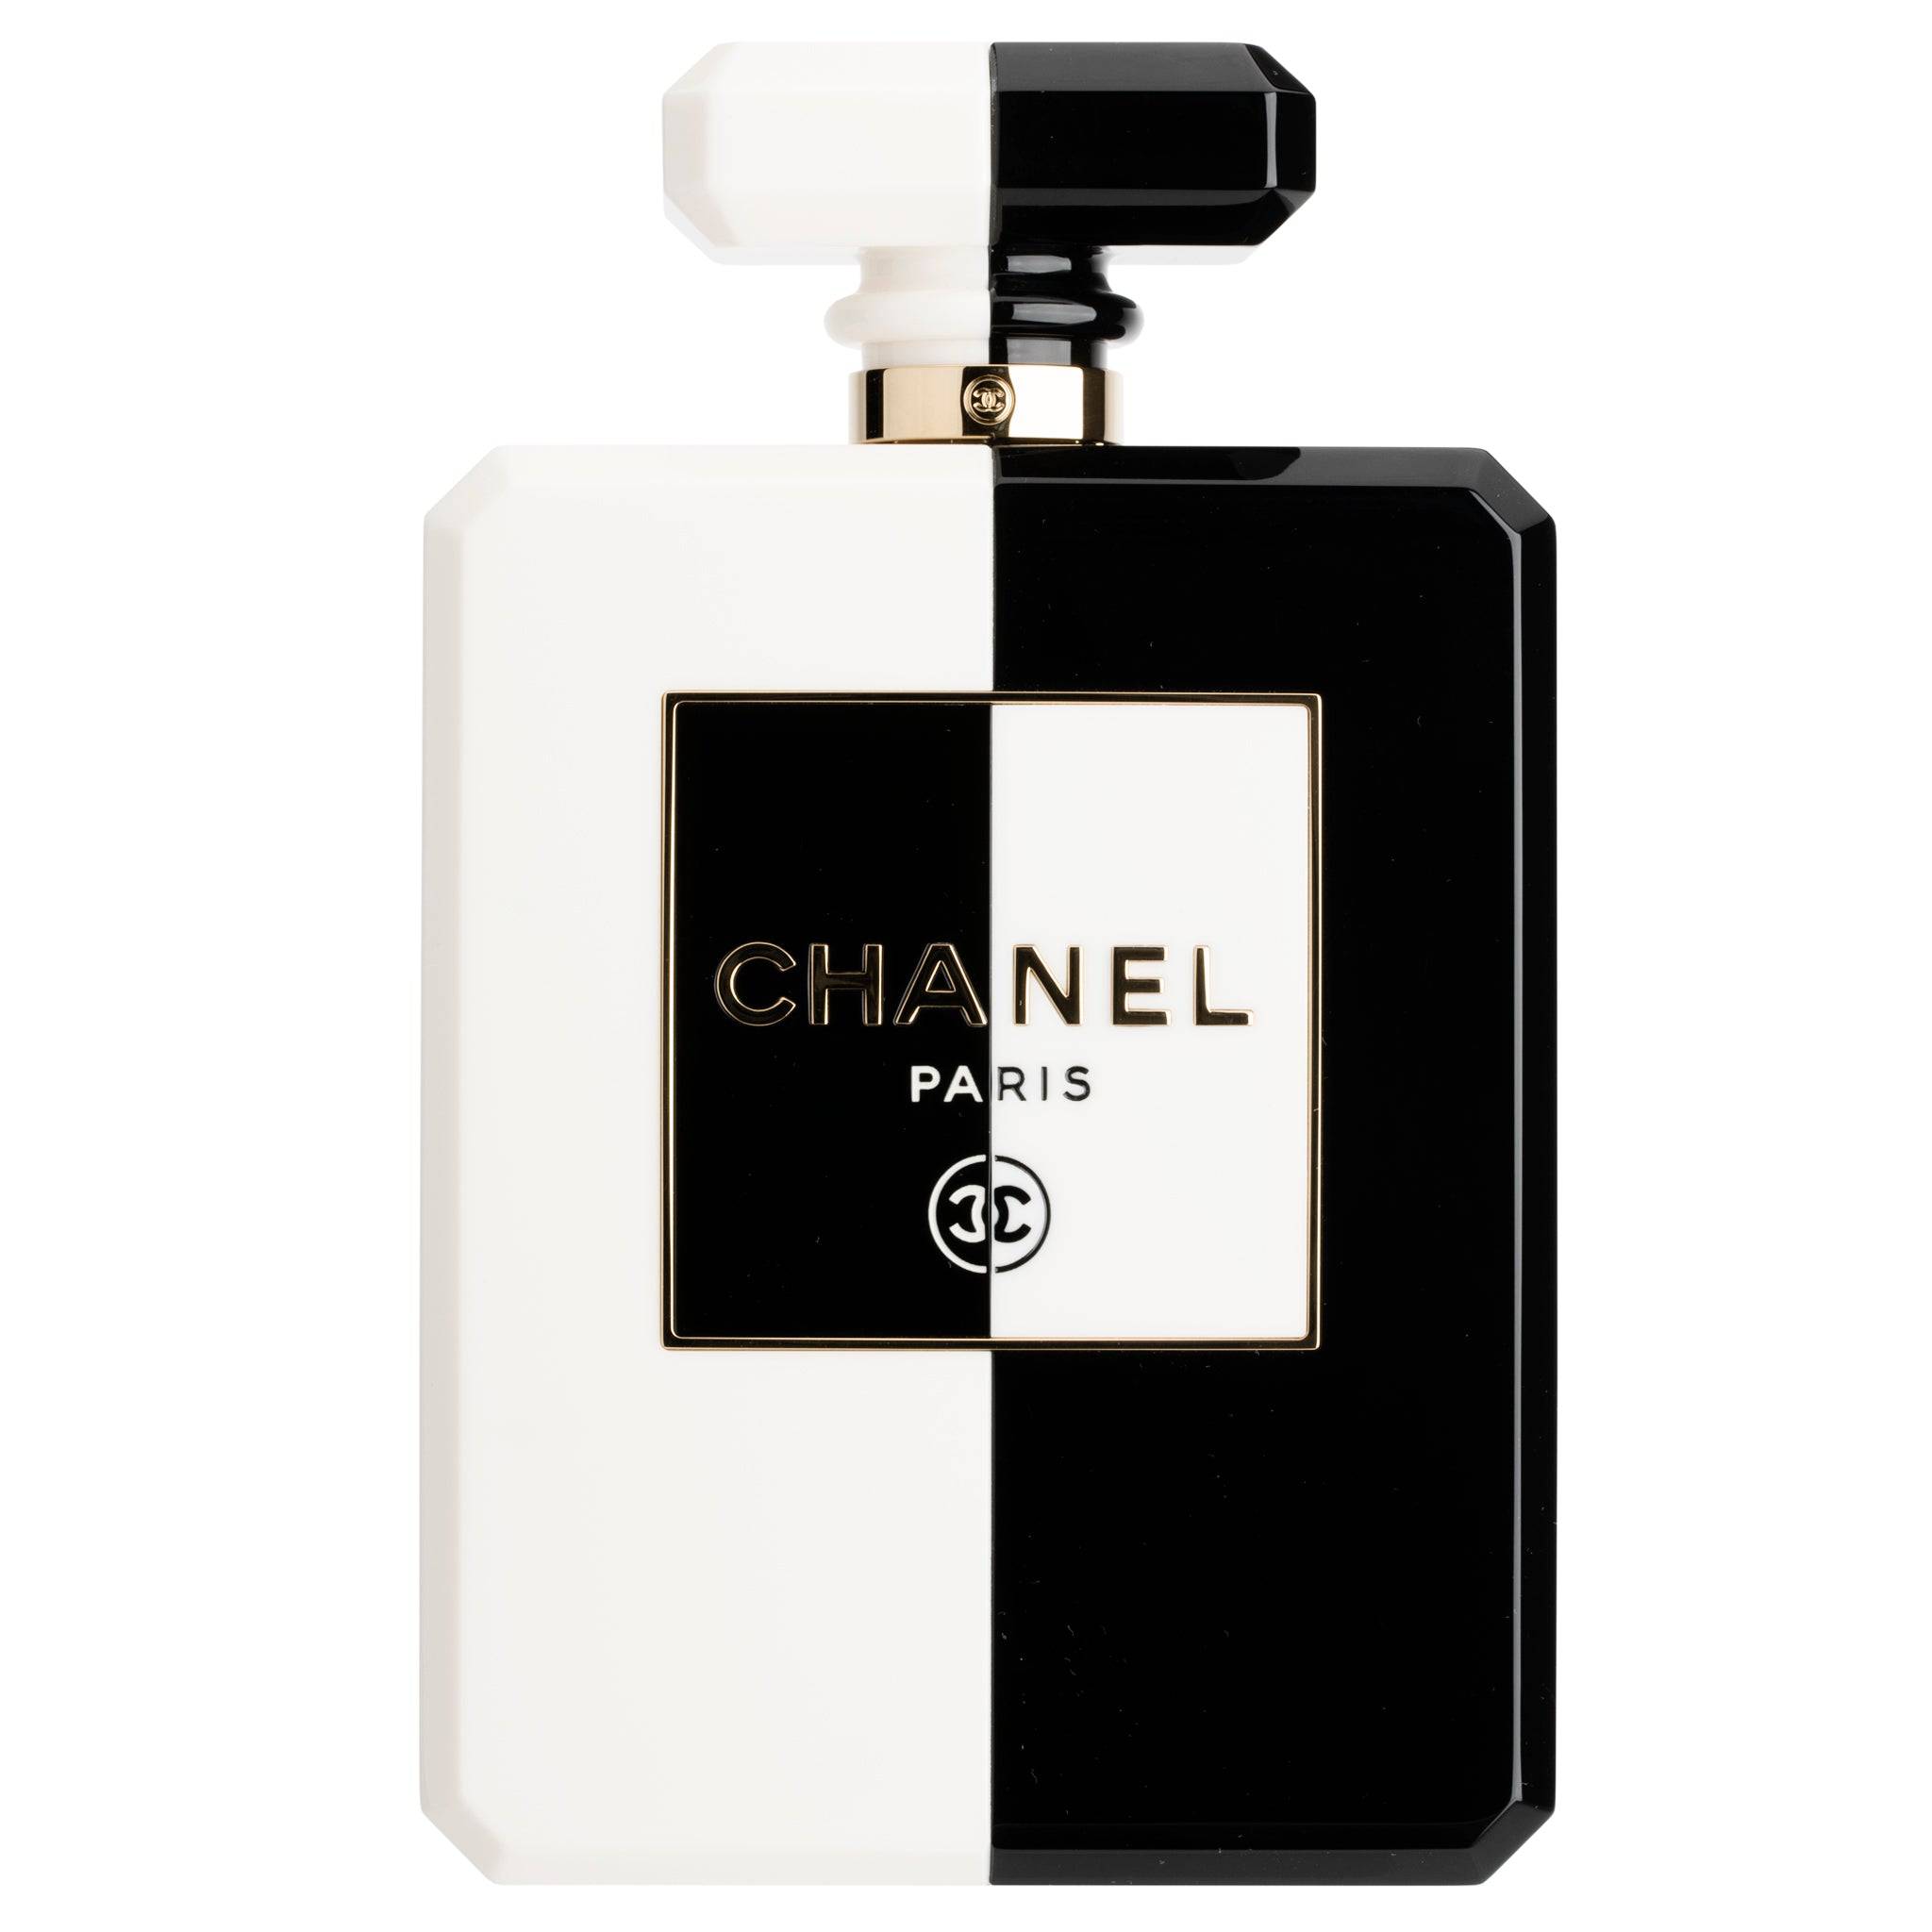 CHANEL MINAUDIÈRE LIMITED EDITION LUCITE PERFUME BOTTLE BLACK & WHITE GOLD HARDWARE - On Repeat